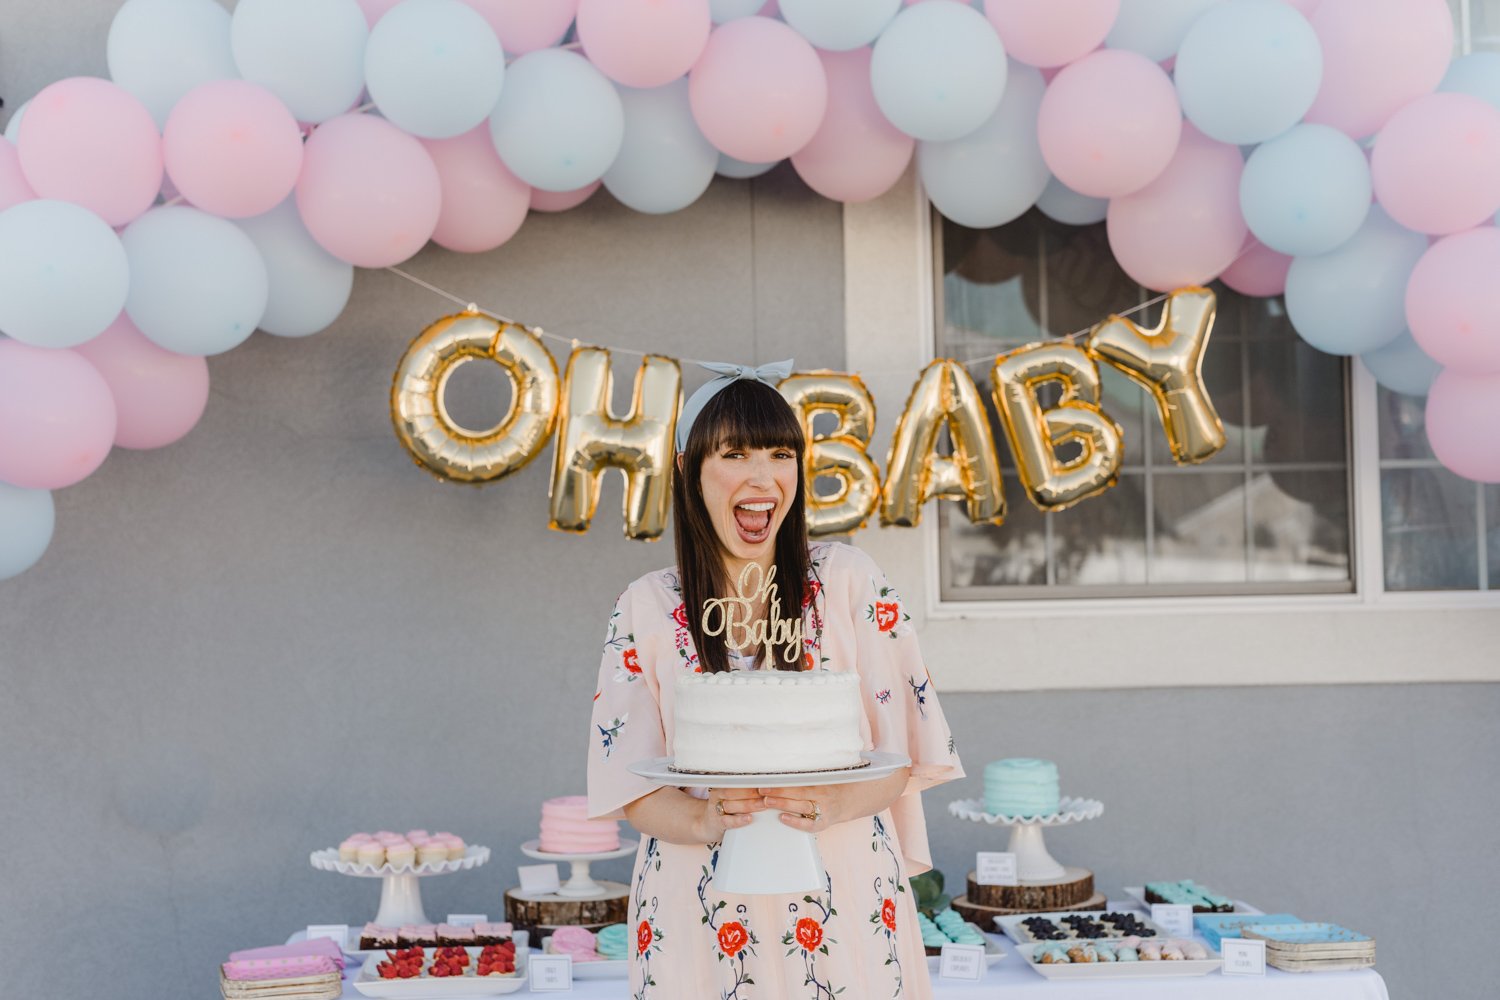 How to plan a gender reveal party?